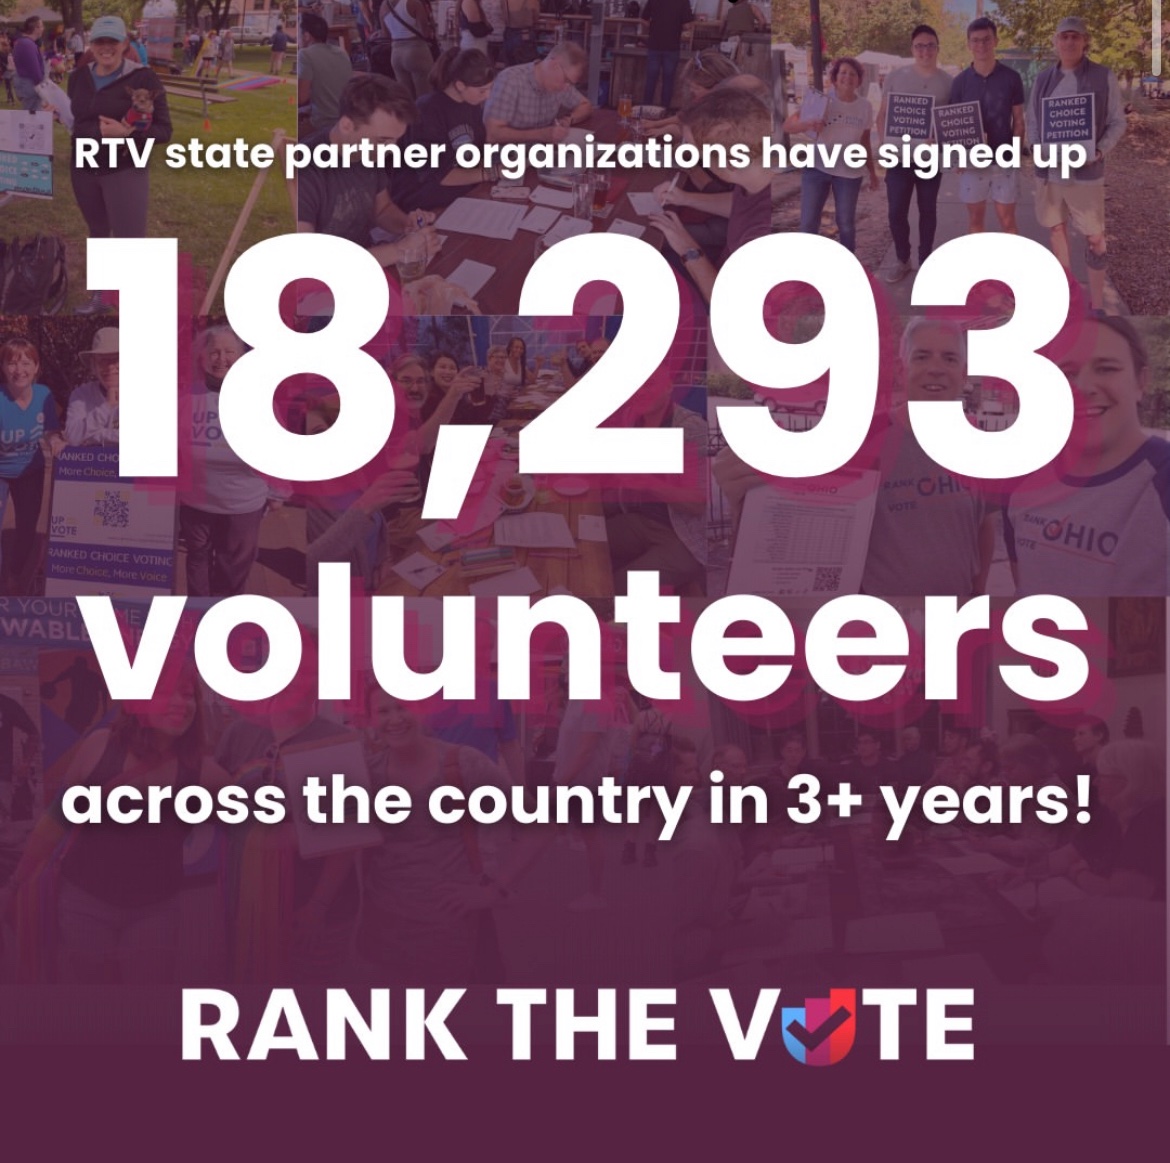 Today is #VolunteerRecognitionDay! We’re so grateful for the thousands upon thousands of #Americans across the country and political spectrum who have signed on to help us fight for #RankedChoiceVoting with allies in nearly every state!